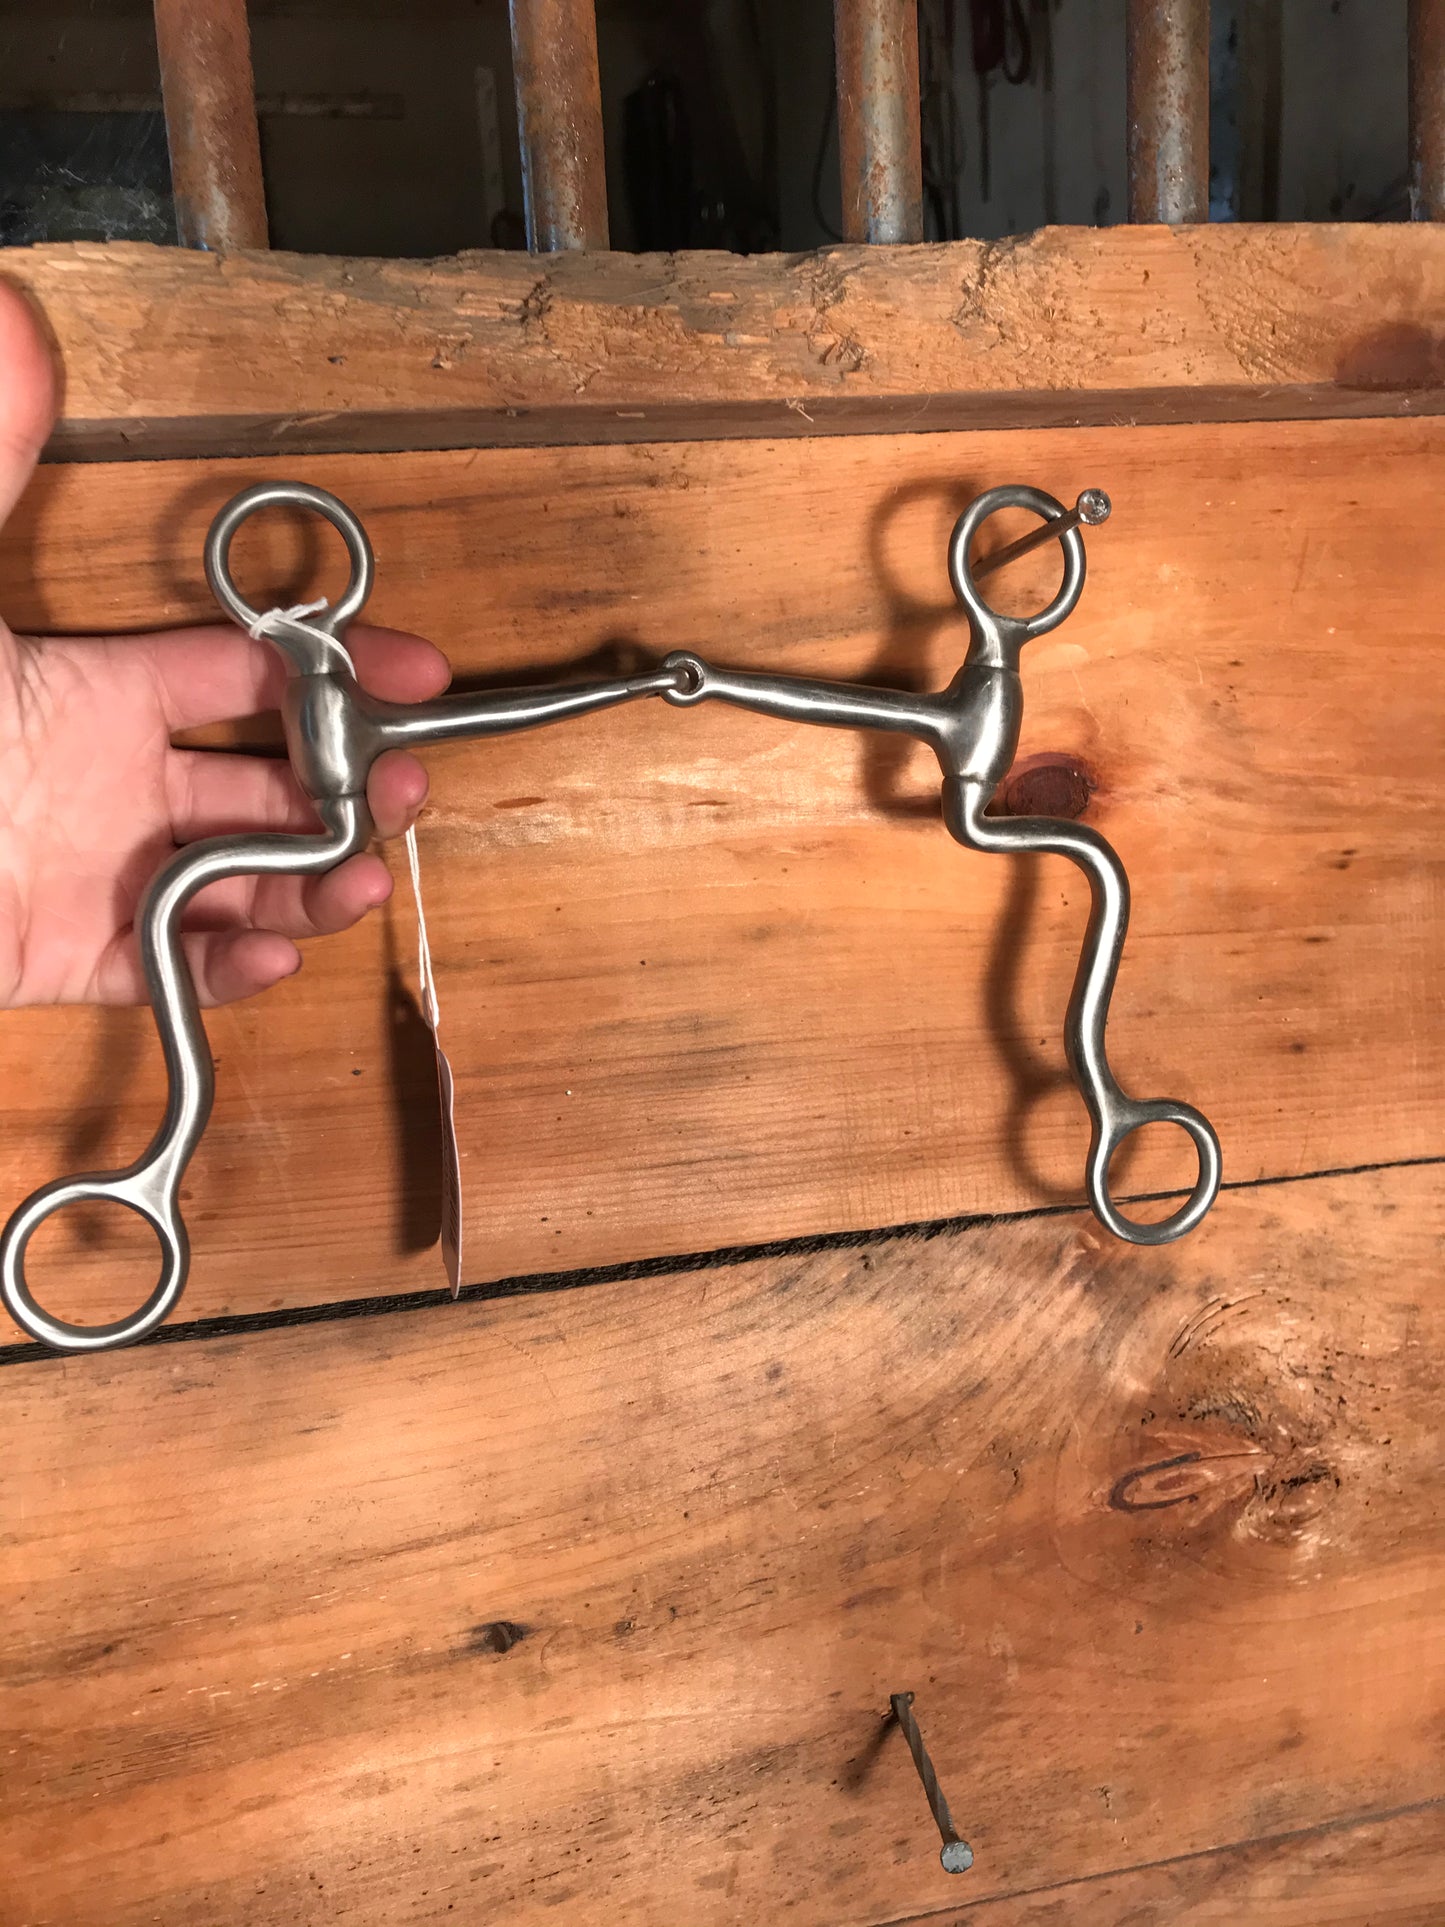 5” brushed stainless steel training snaffle